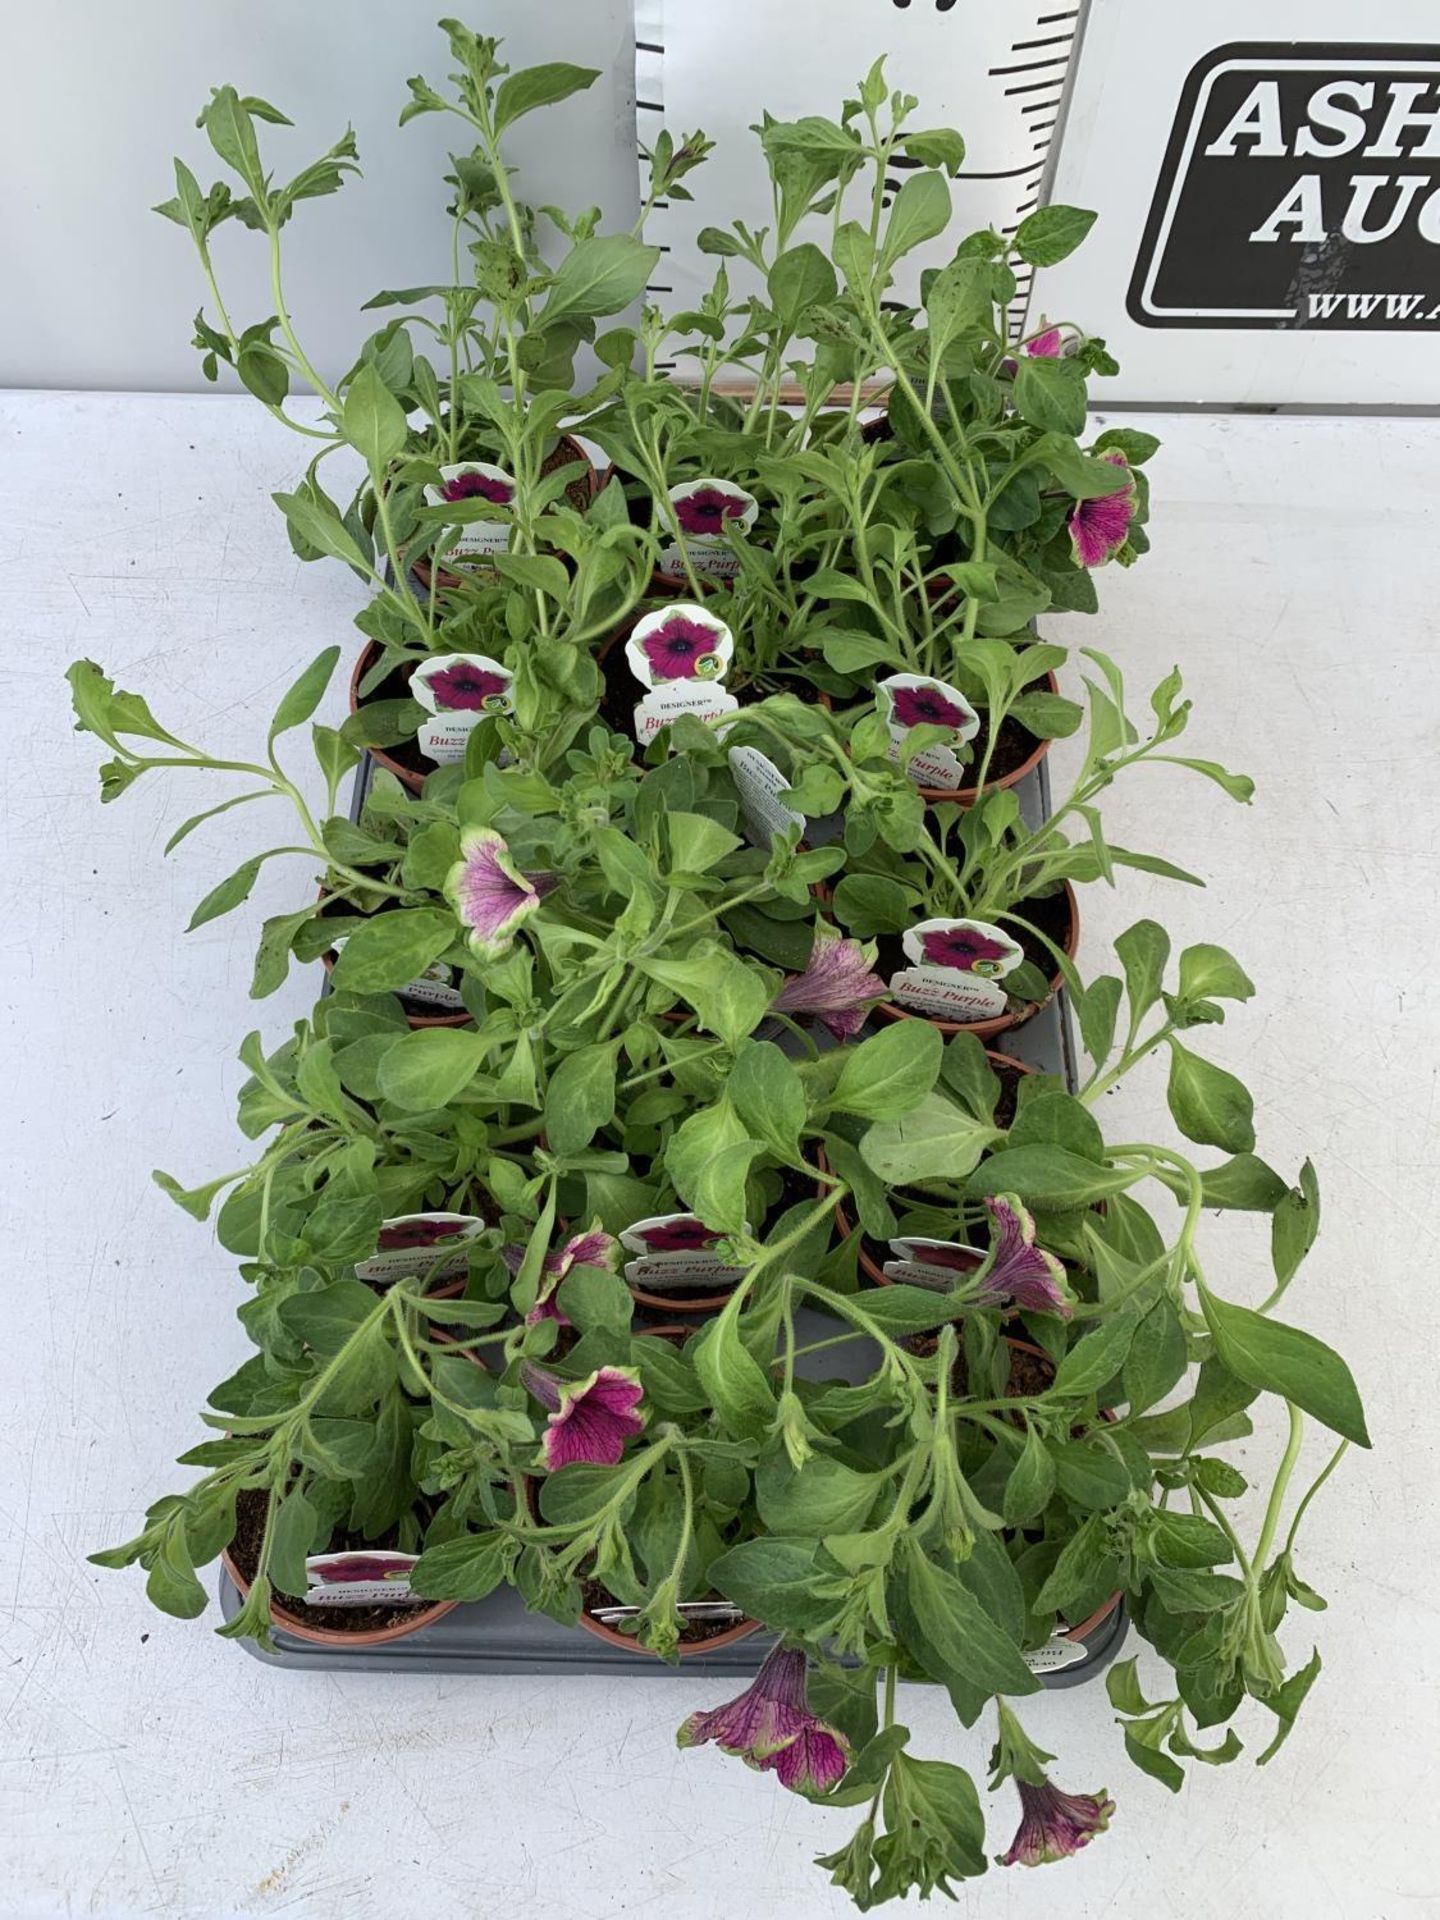 FIFTEEN PETUNIA BUZZ PURPLE BASKET PLANTS IN P9 POTS PLUS VAT TO BE SOLD FOR THE FIFTEEN - Image 4 of 6